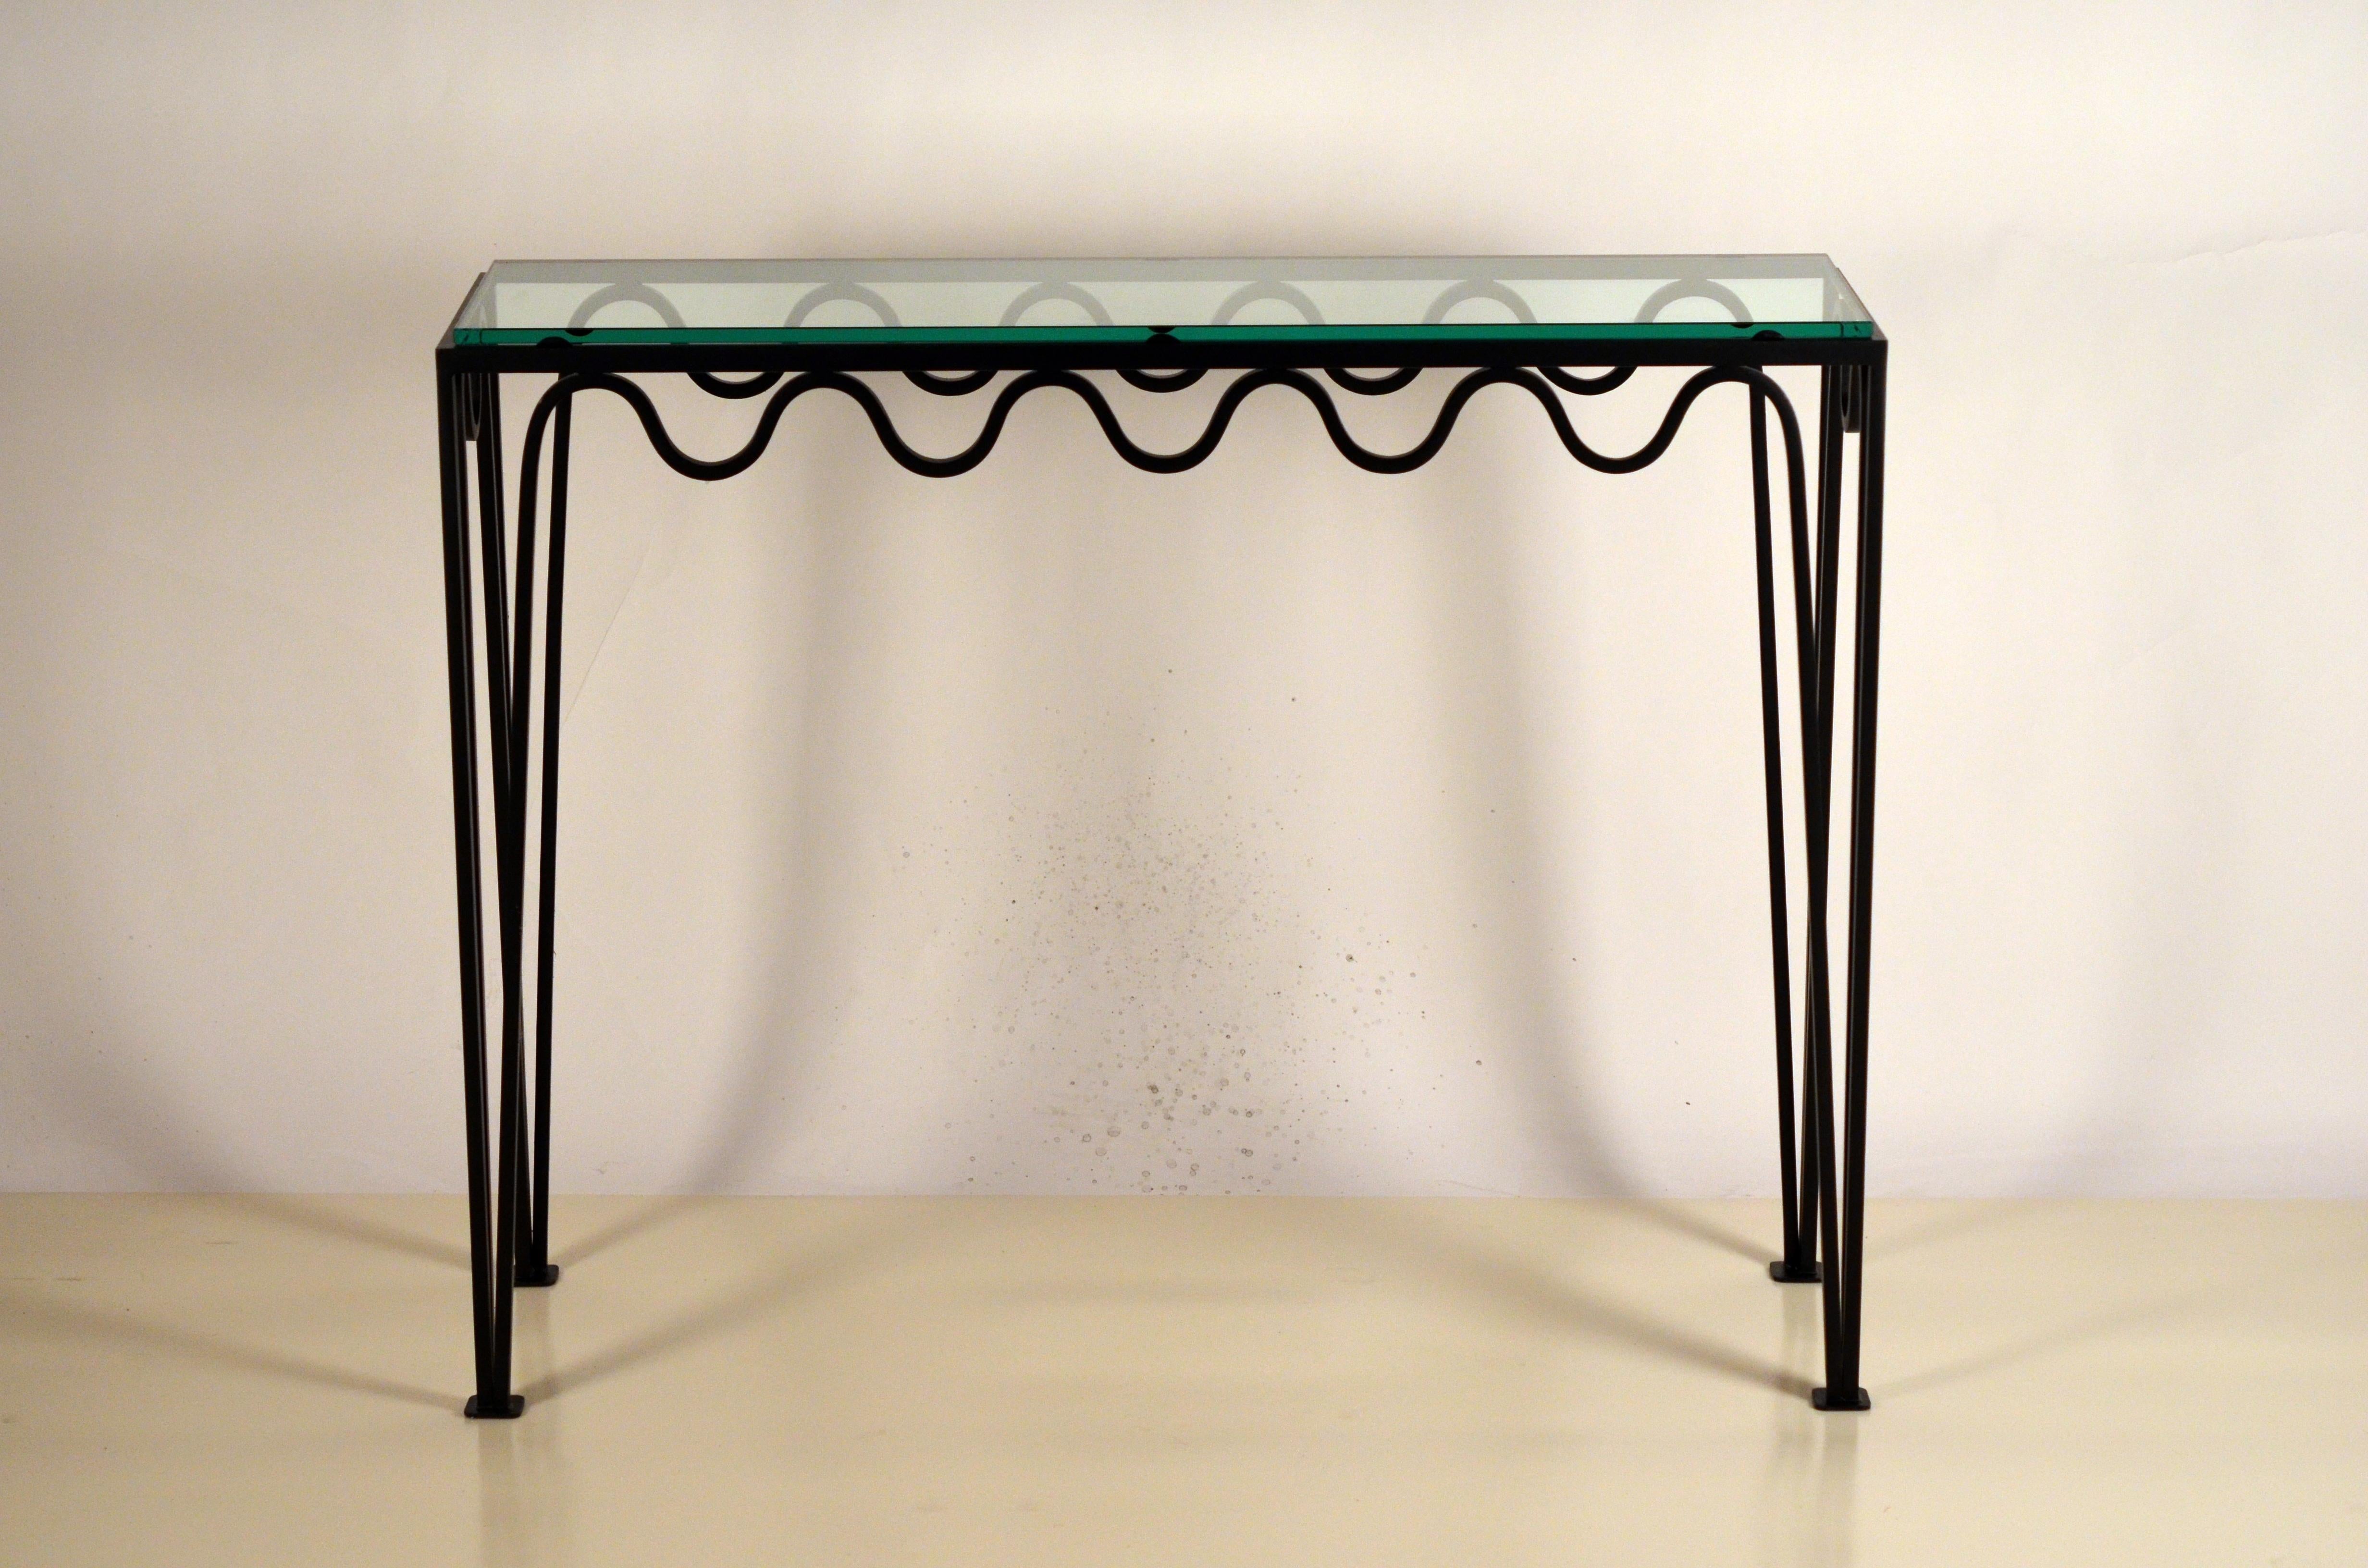 Undulating blackened iron and glass console by DESIGN FRÈRES.

These Méandre™ consoles from our exclusive DESIGN FRÈRES® line are handmade in our Los Angeles atelier by our skilled artisans. These classic pieces will blend in, structure and enhance